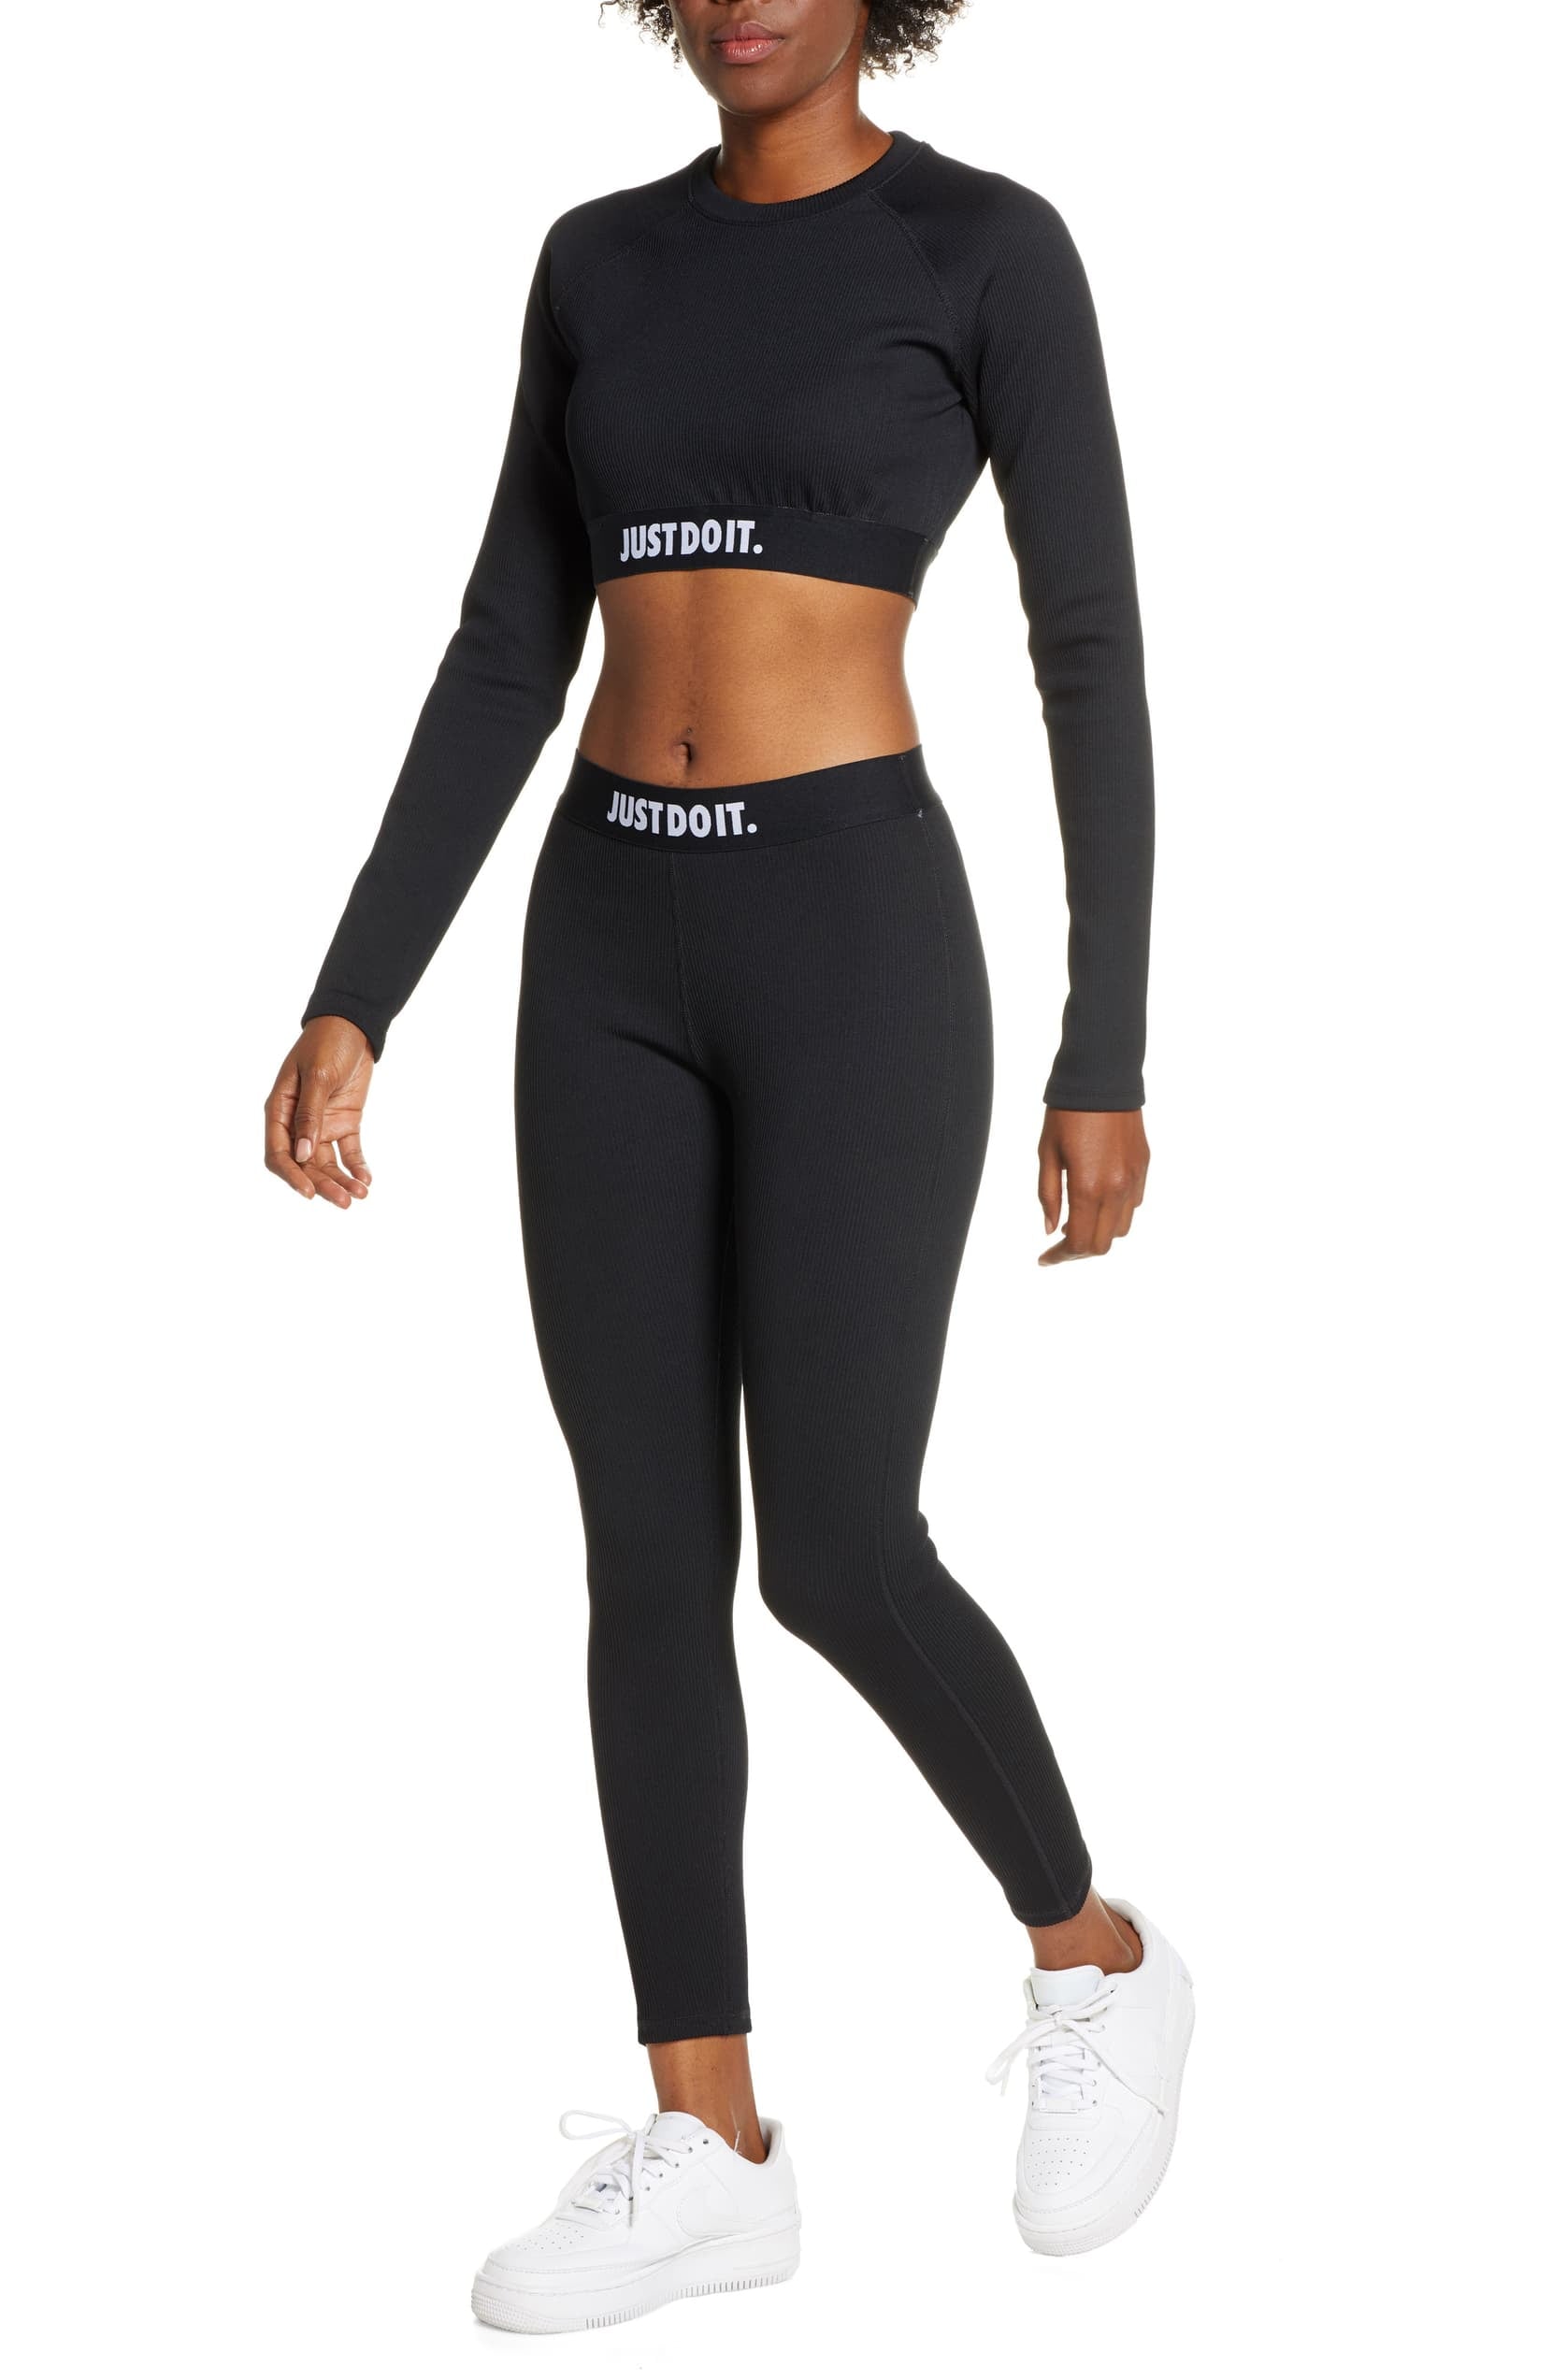 ik heb dorst hemel interview Nike JDI Rib Crop Top and Ribbed JDI Leggings | These 10 Matching Workout  Sets Are the Prettiest Gifts For Any Fashionable Fitness Fan | POPSUGAR  Fitness Photo 10